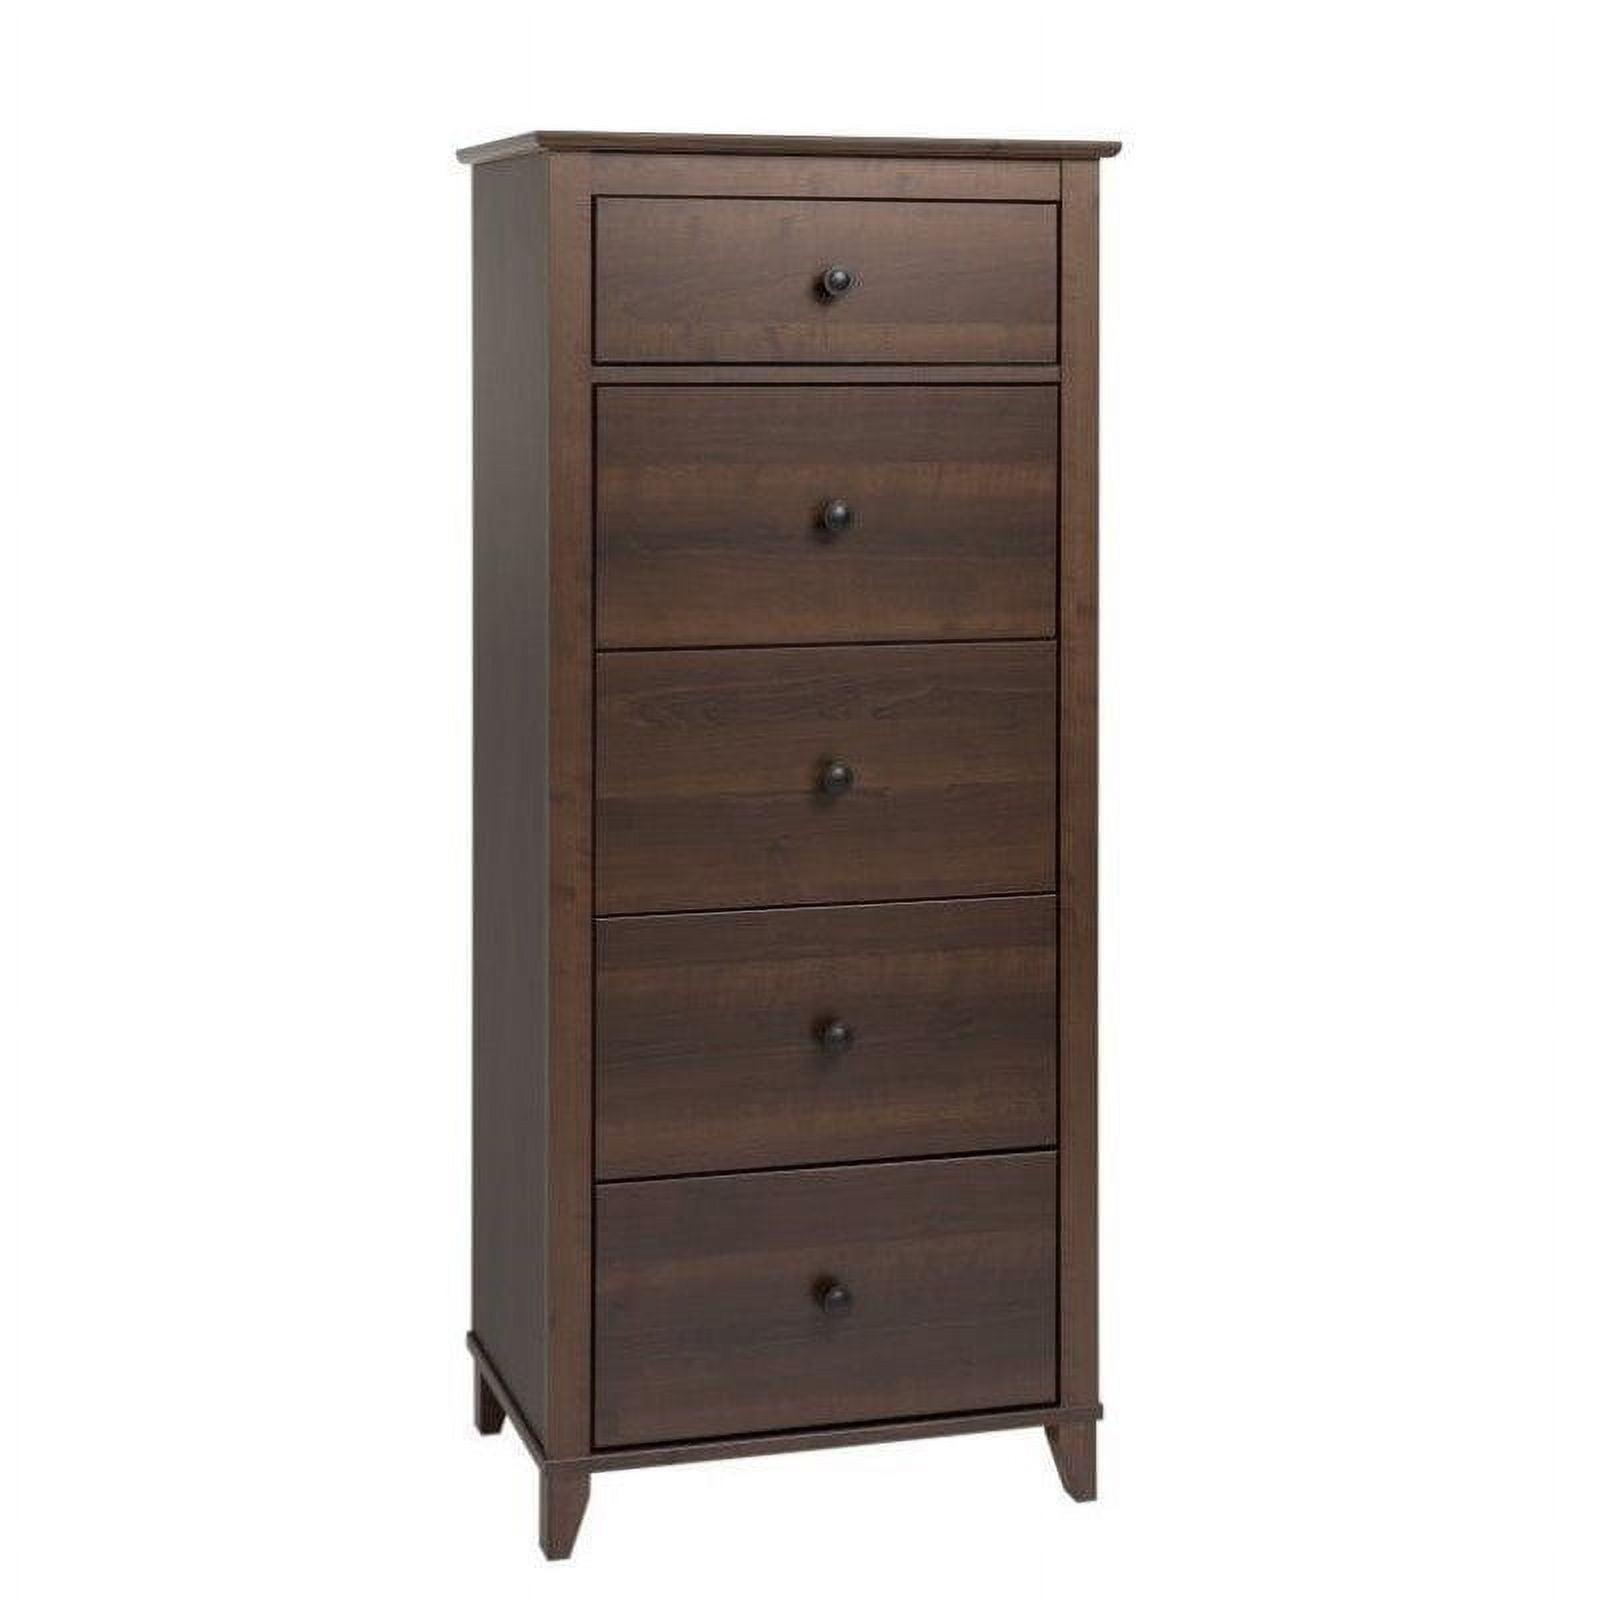 Espresso 52.5" Tall Freestanding Lingerie Chest with Deep Drawers